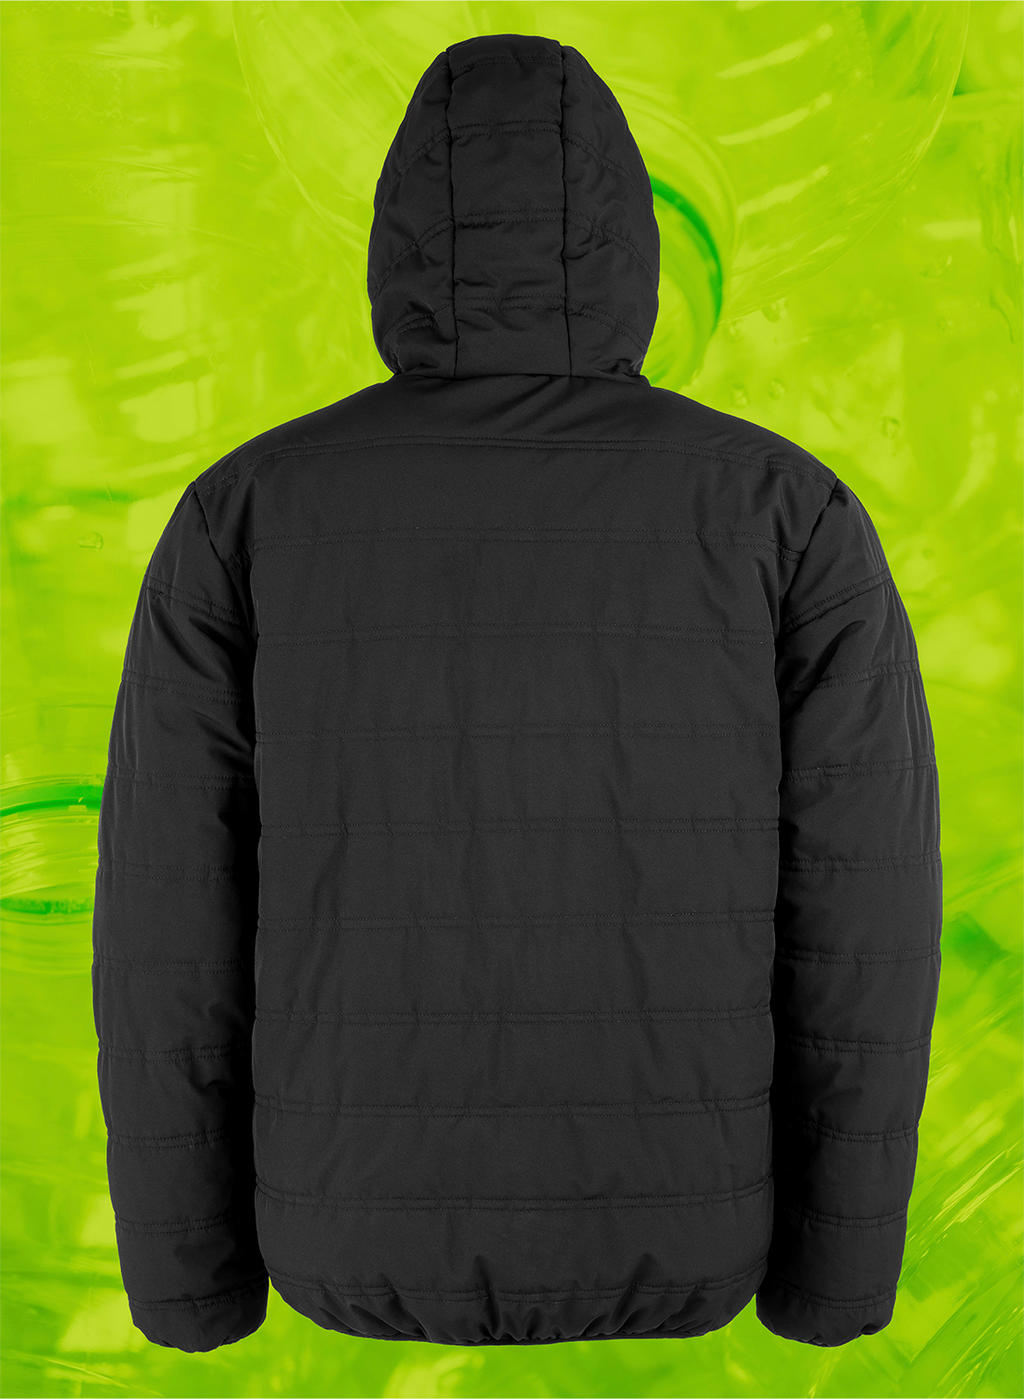  Black Compass Padded Winter Jacket in Farbe Black/Grey